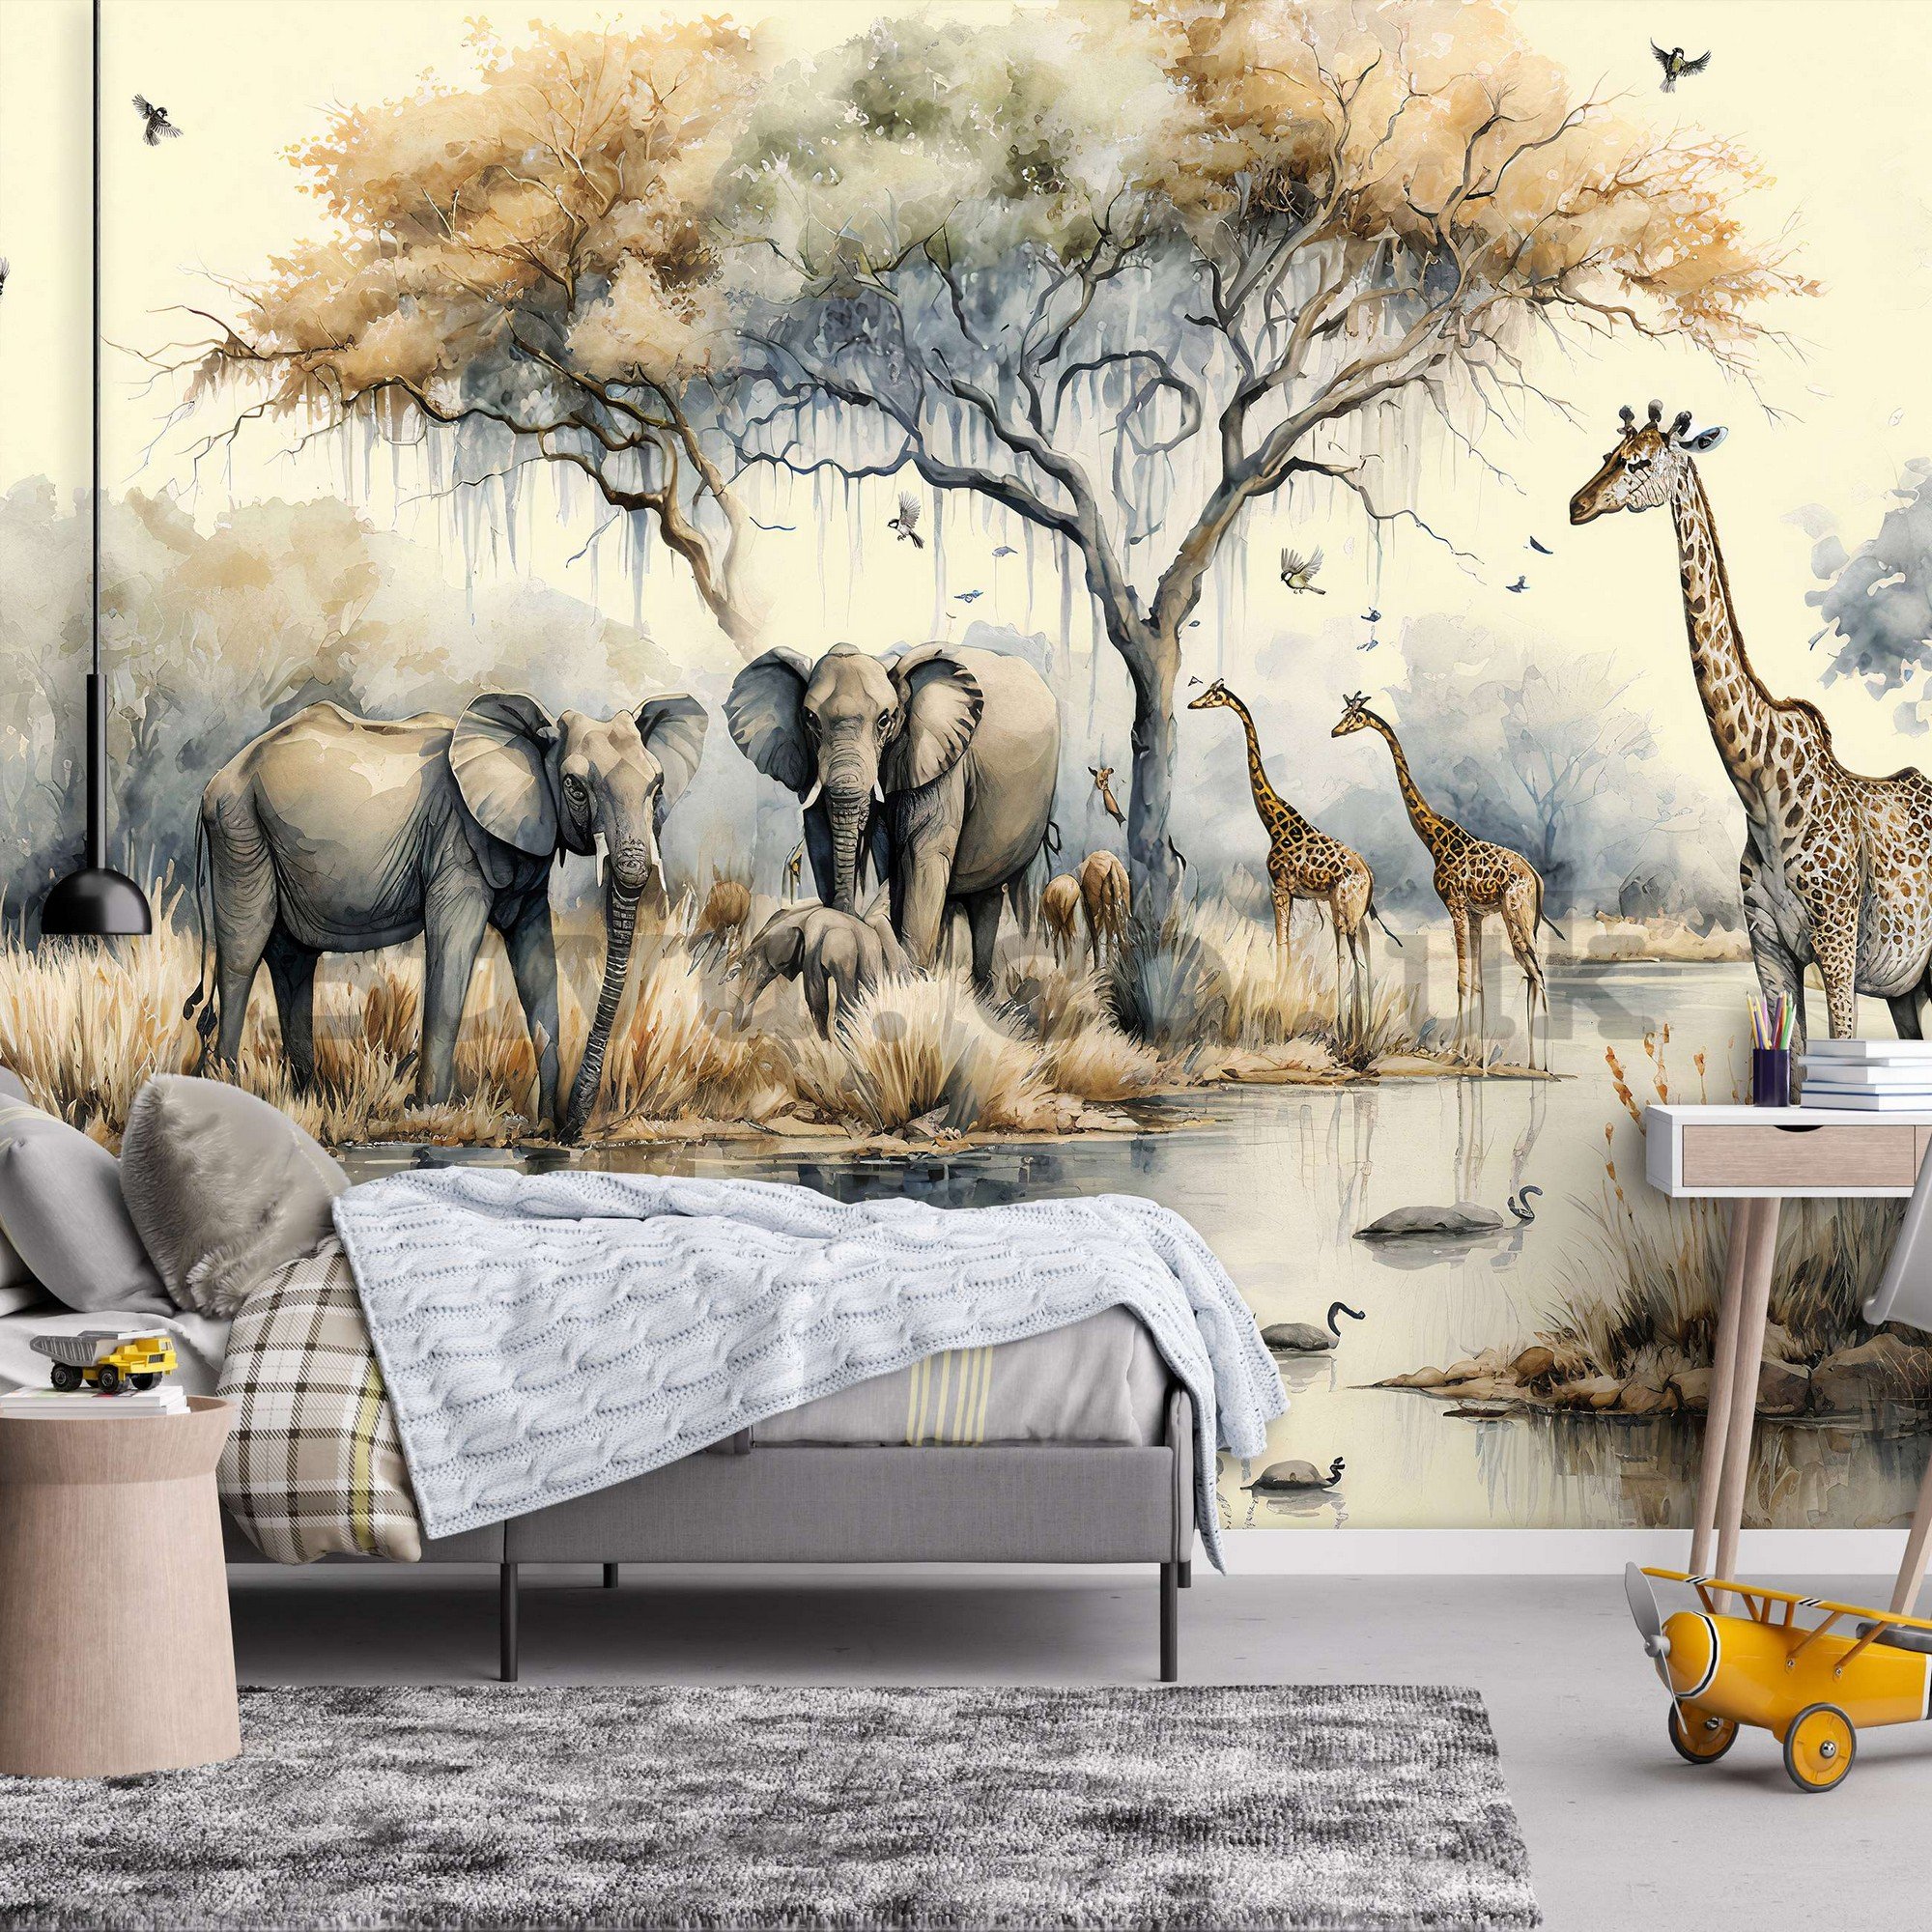 Wall mural vlies: Wild animals at the watering hole - 152,5x104 cm